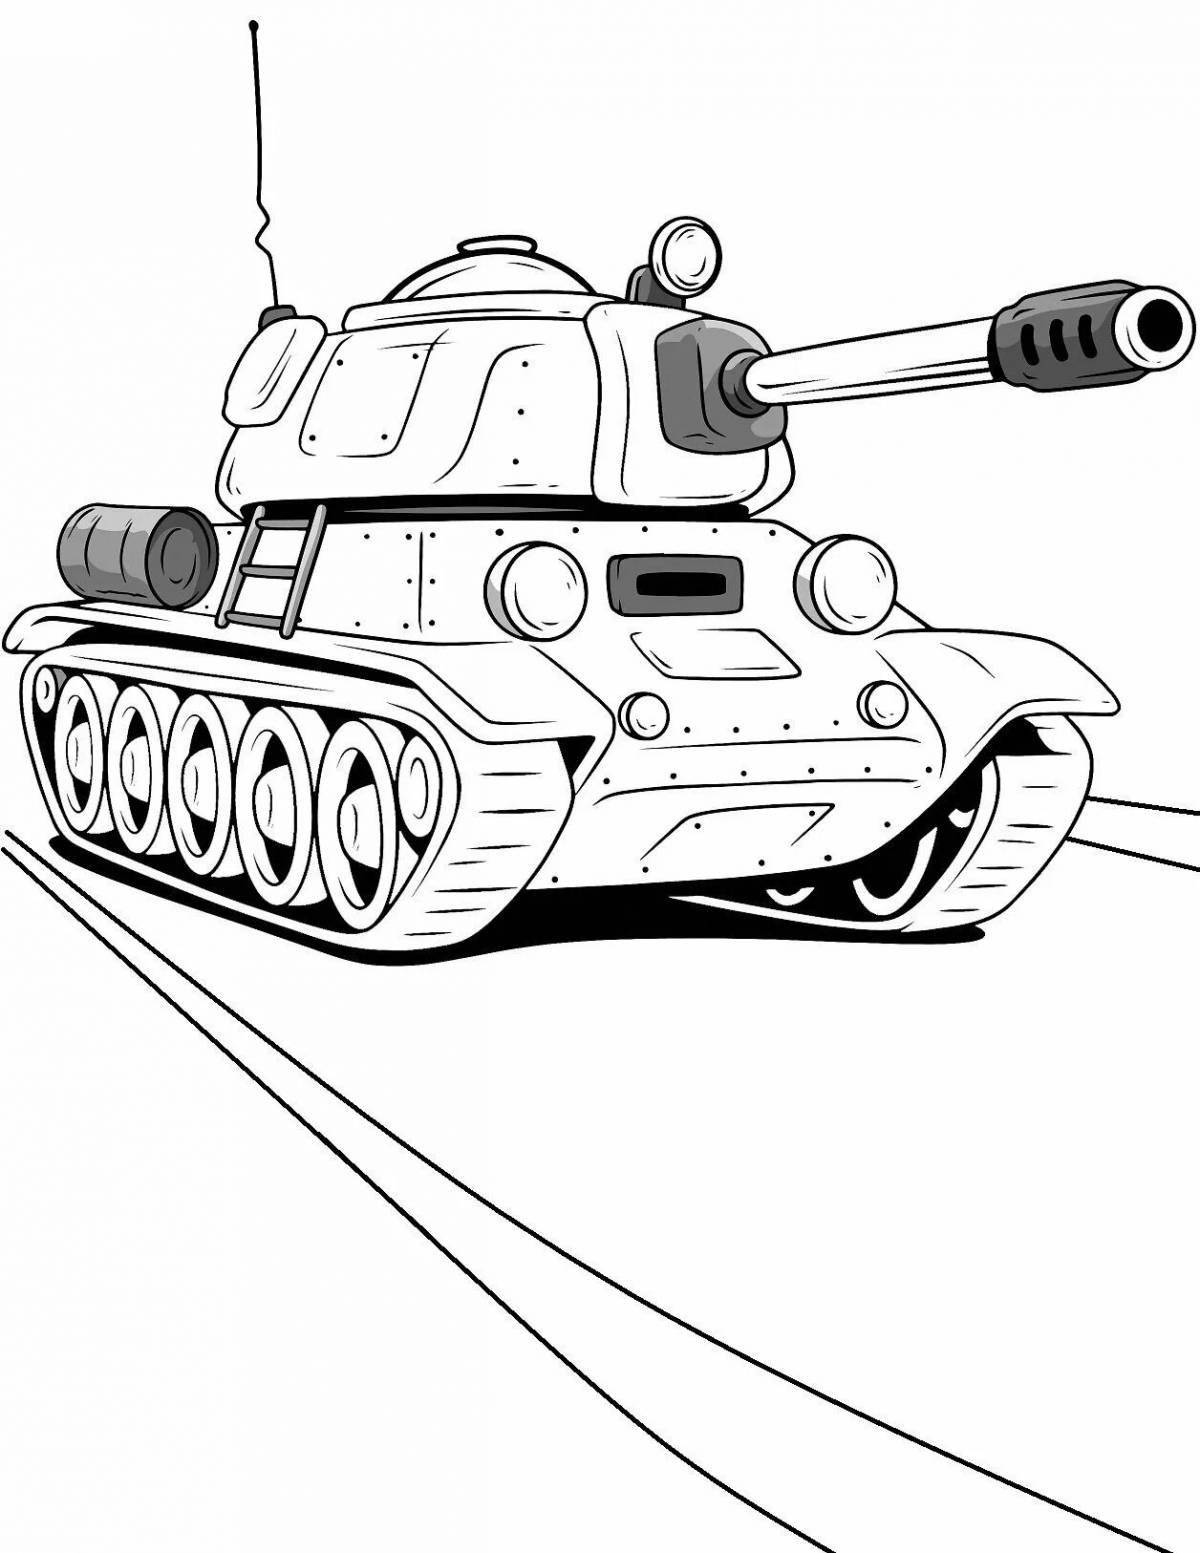 Amazing t34 85 coloring book